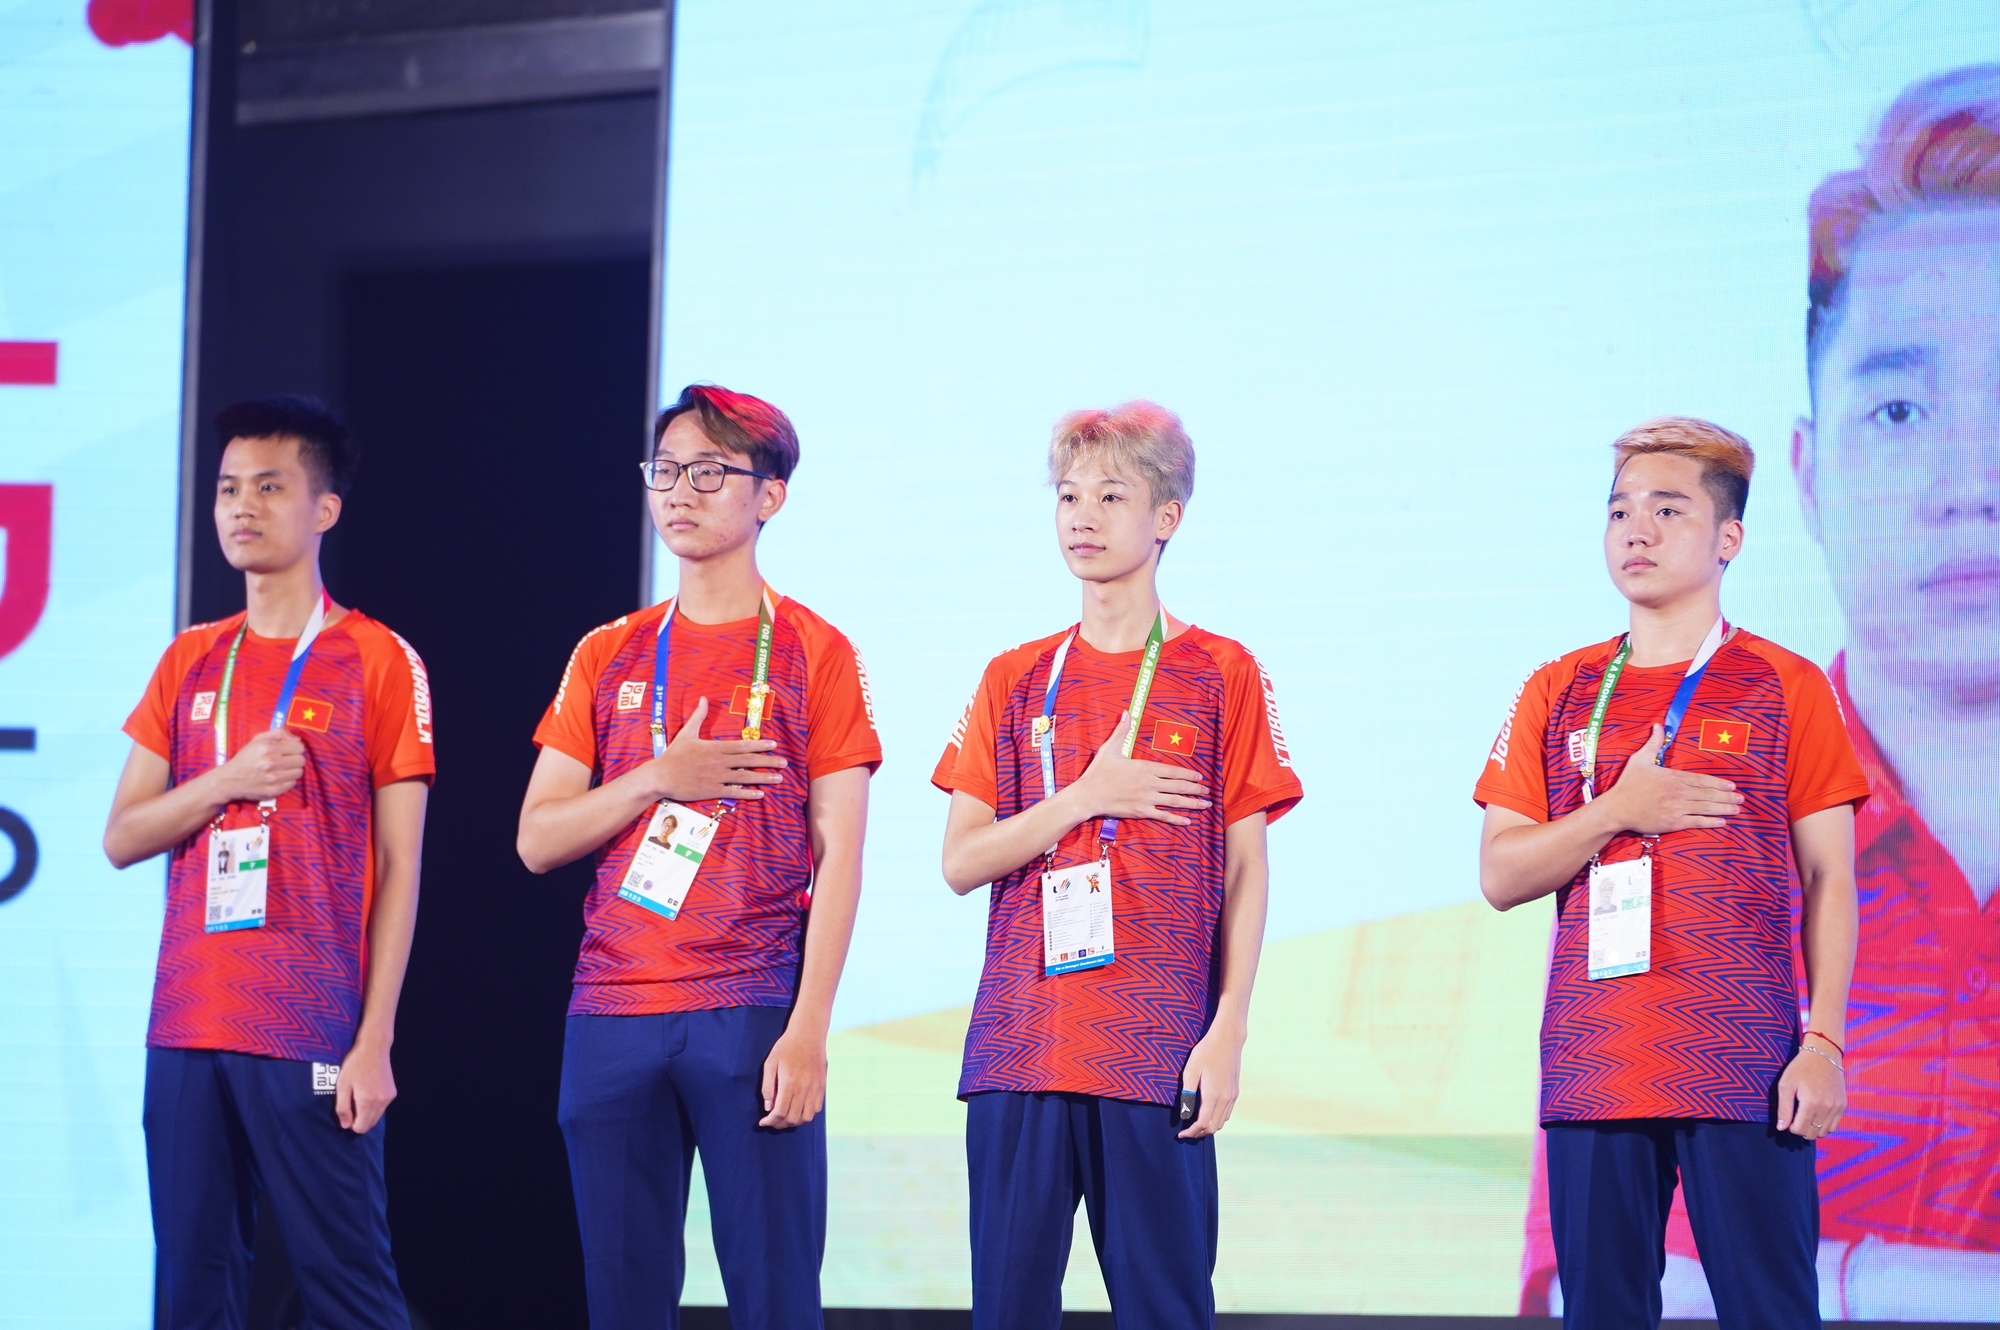 With explosive competition, Vietnam won the 2nd Esports gold medal in individual PUBG Mobile content - Photo 4.